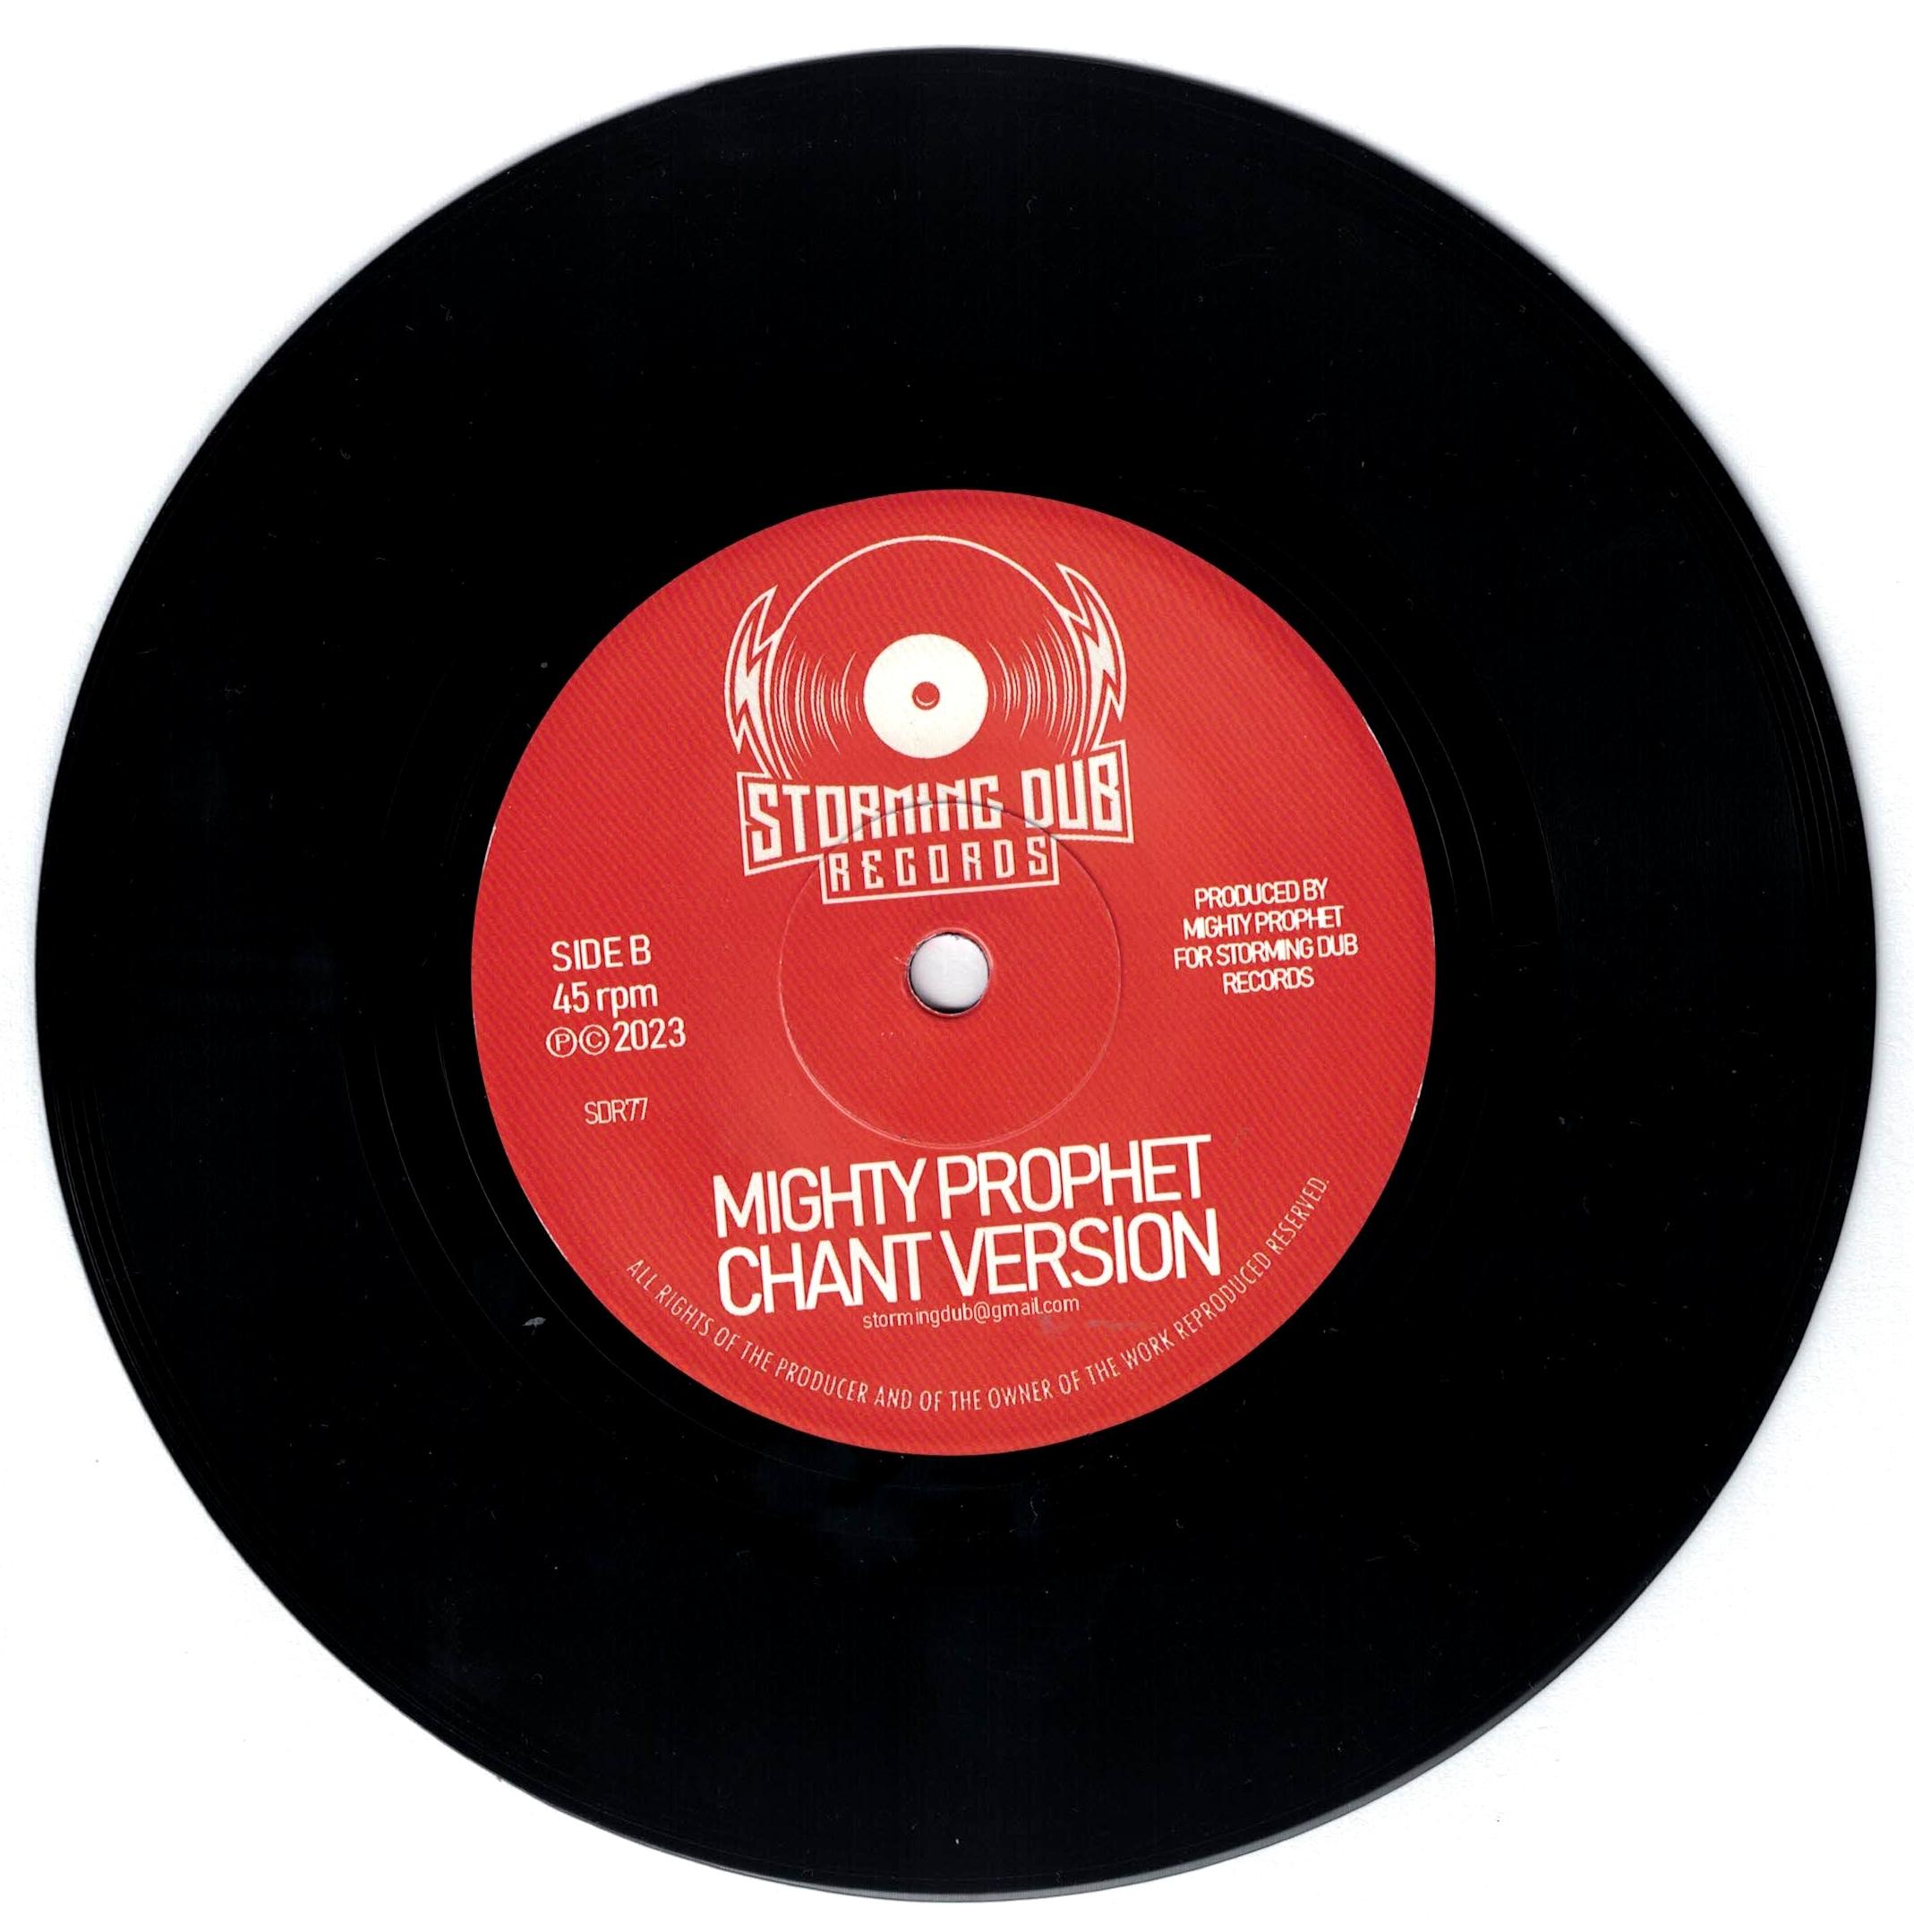 CHANT FOR JUSTICE Digistep meets Mighty Prophet STORMING DUB 7 inch